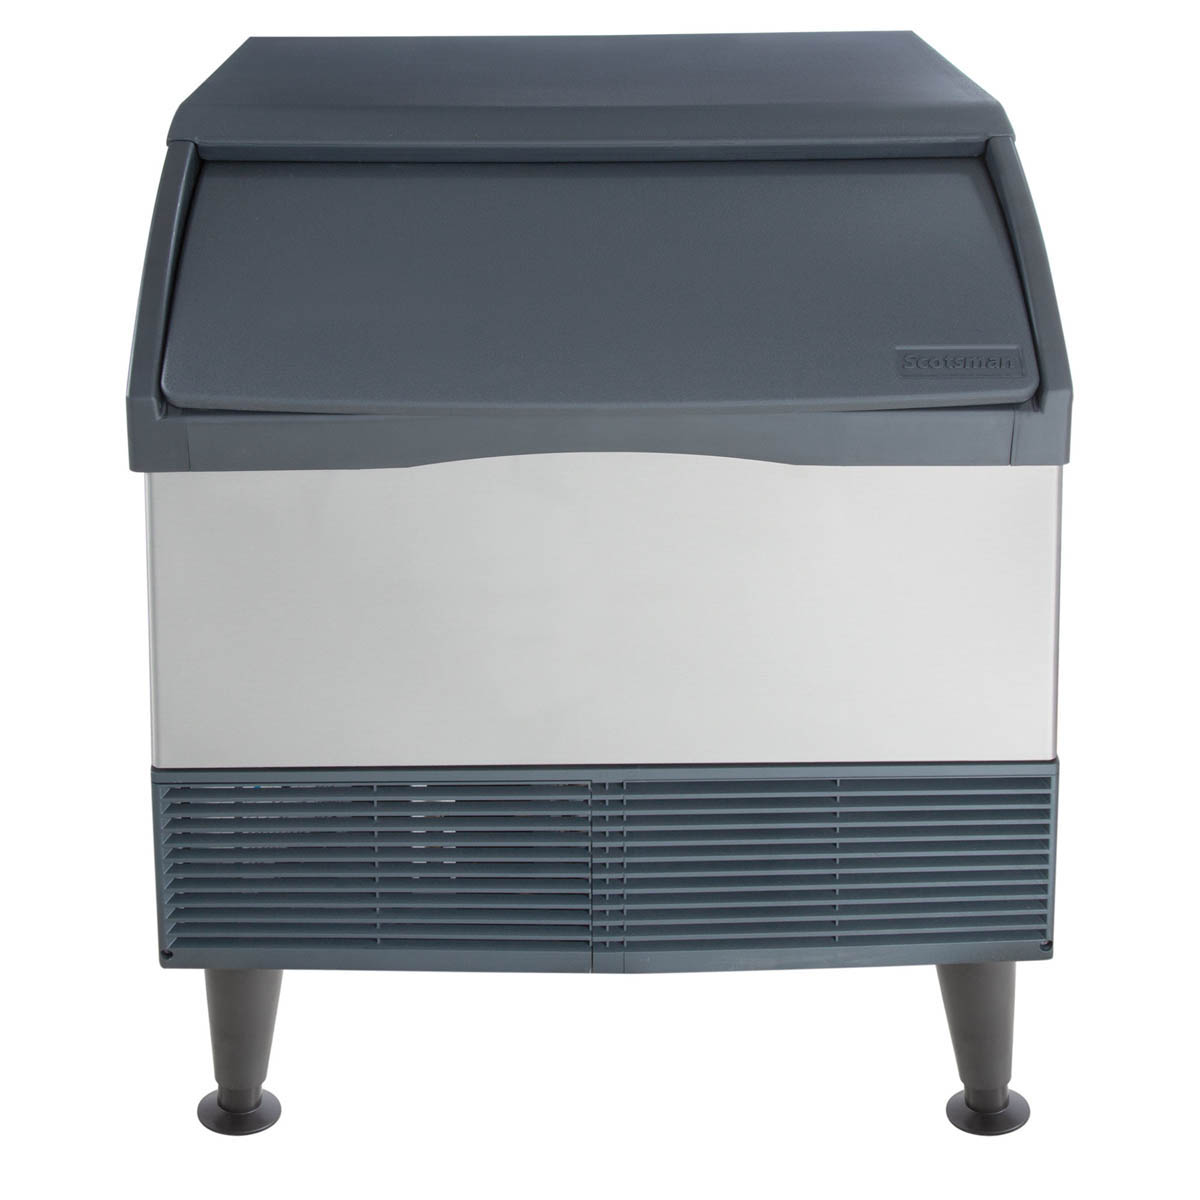 Scotsman CU3030MA-1 Self-Contained Under Counter Cuber with Storage, Chef's Deal